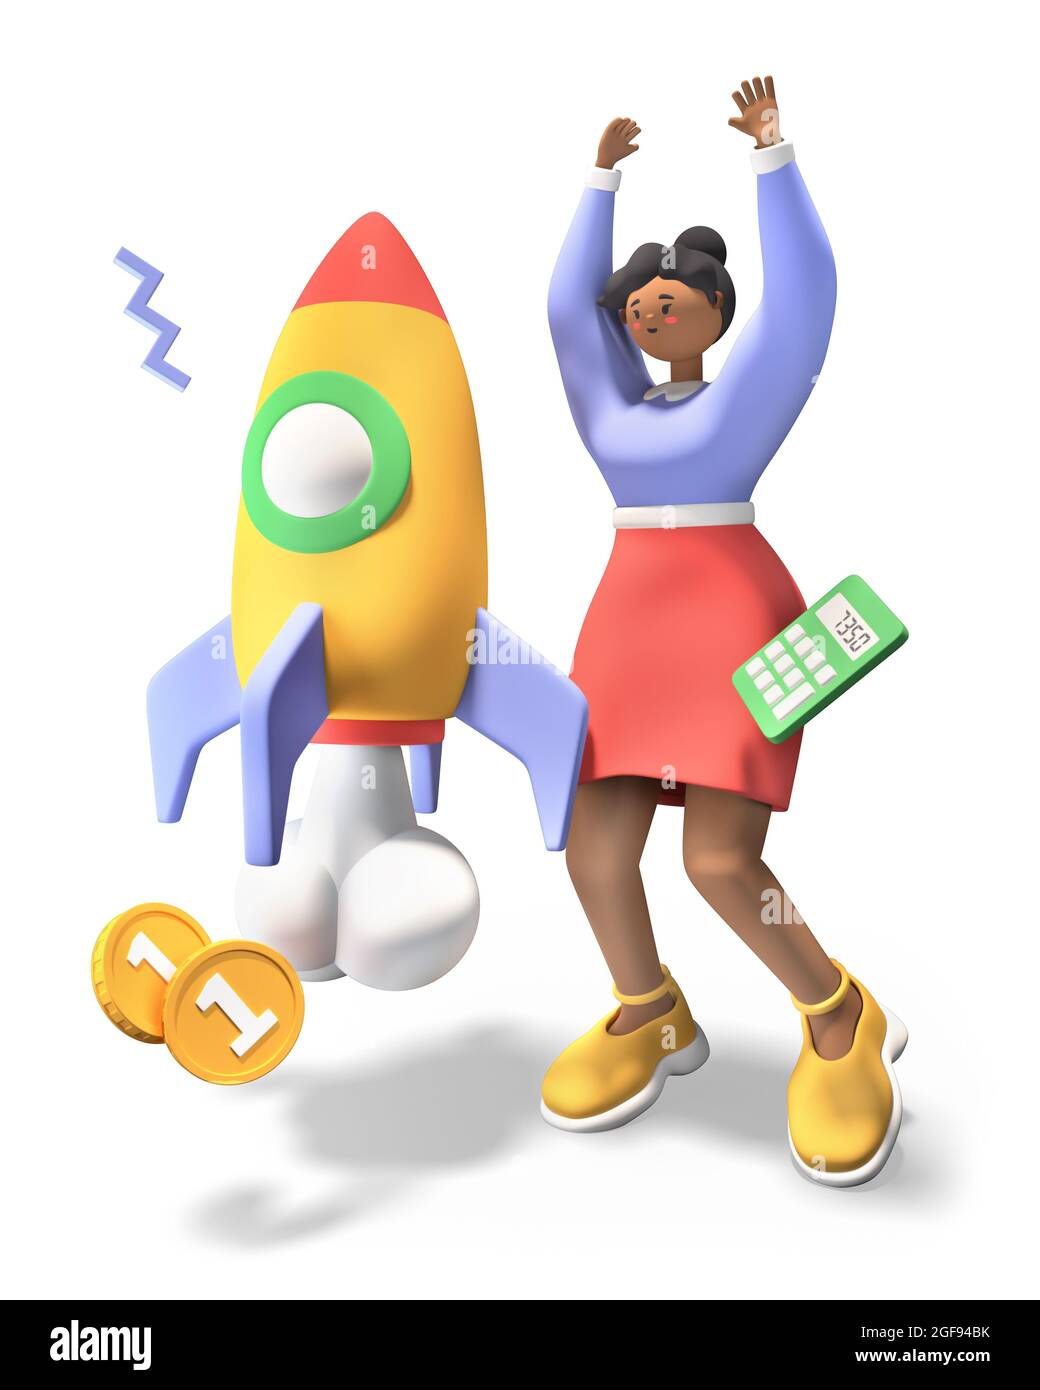 Successful launch - colorful 3D style illustration cartoon style character. Young African American girl is happy to takeoff the rocket, which symboliz Stock Photo